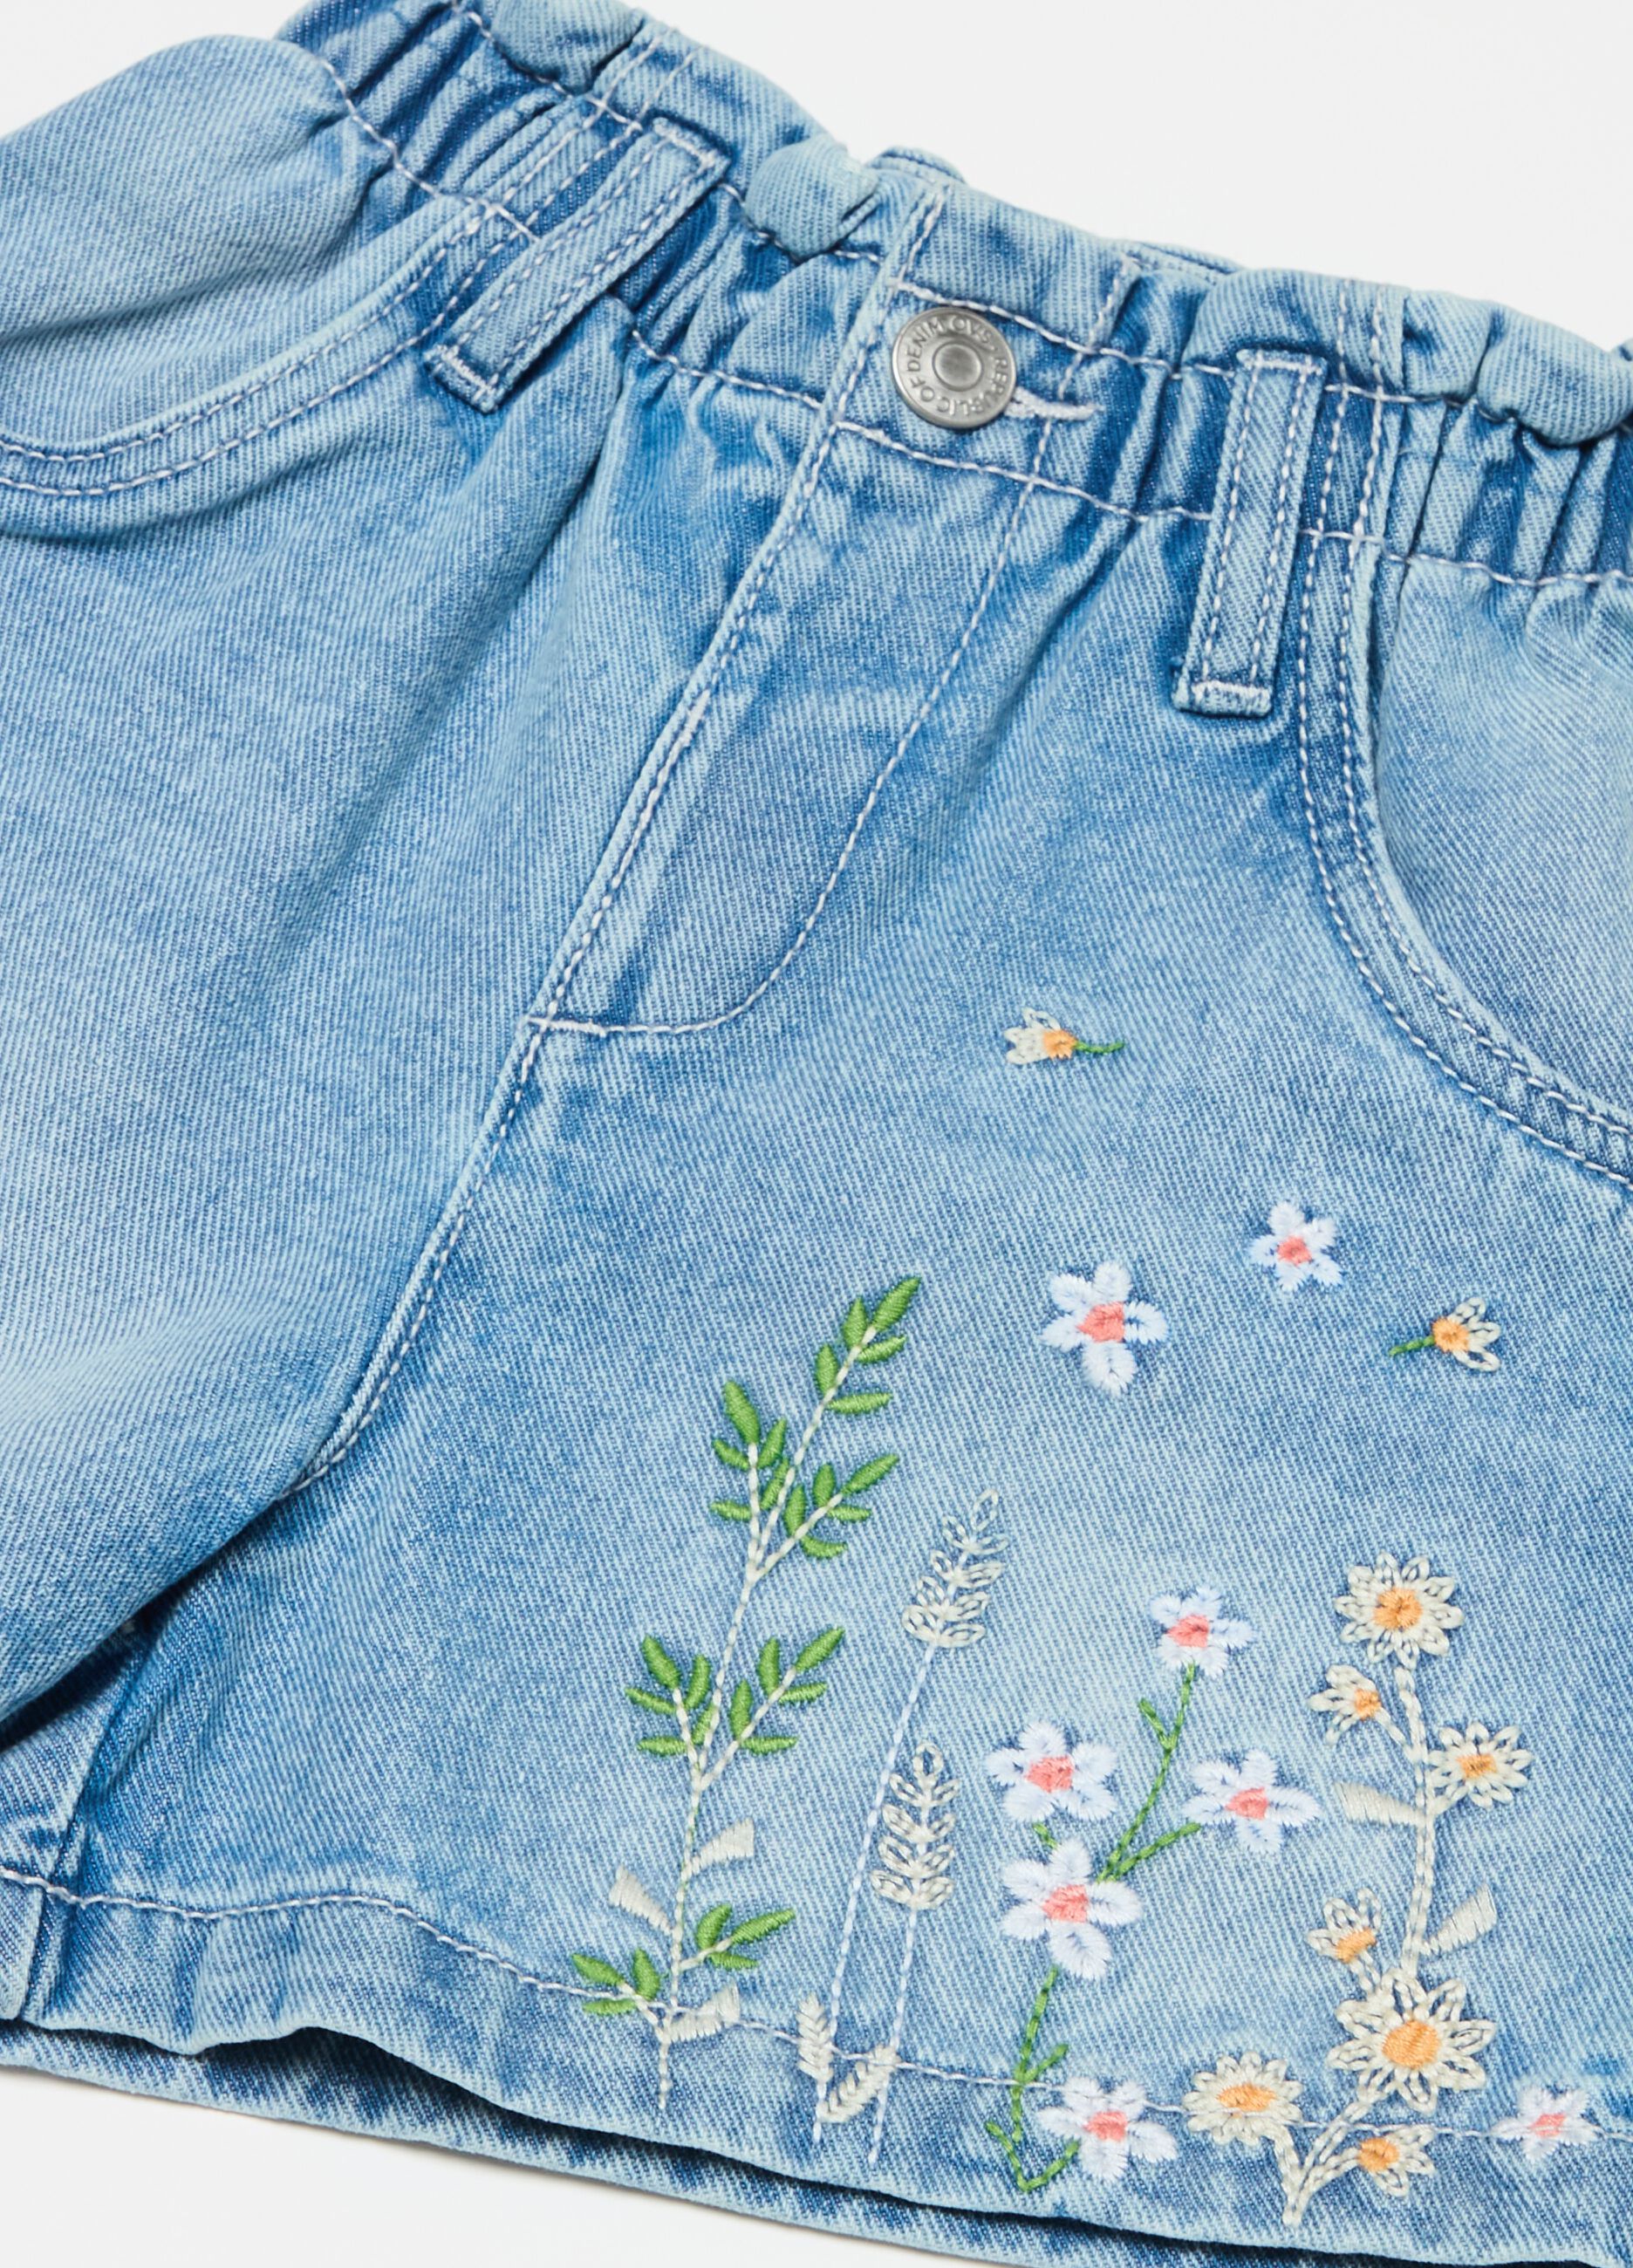 Denim shorts with flower embroidery